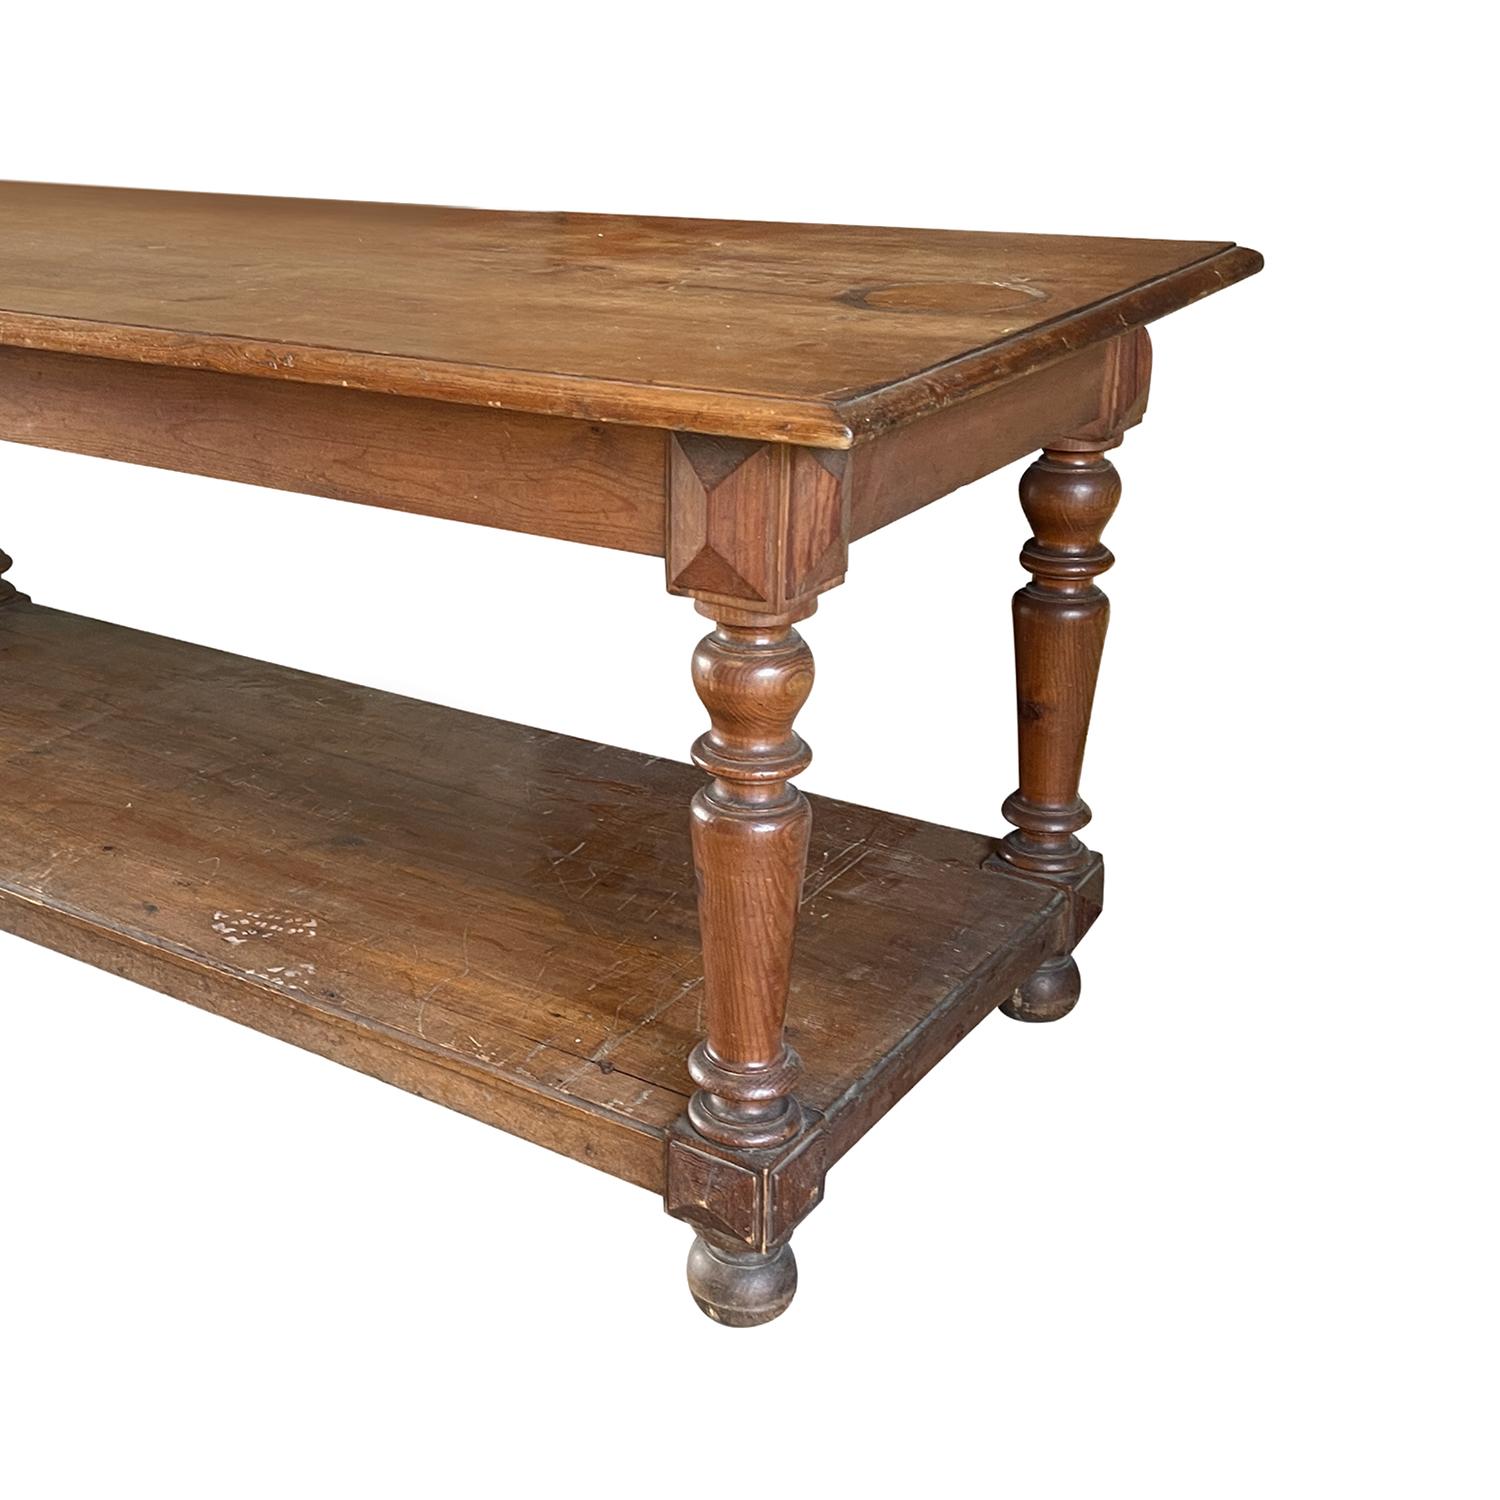 19th Century French Antique Walnut Draper’s, Drapier Table, Antique Tailor Table In Good Condition For Sale In West Palm Beach, FL